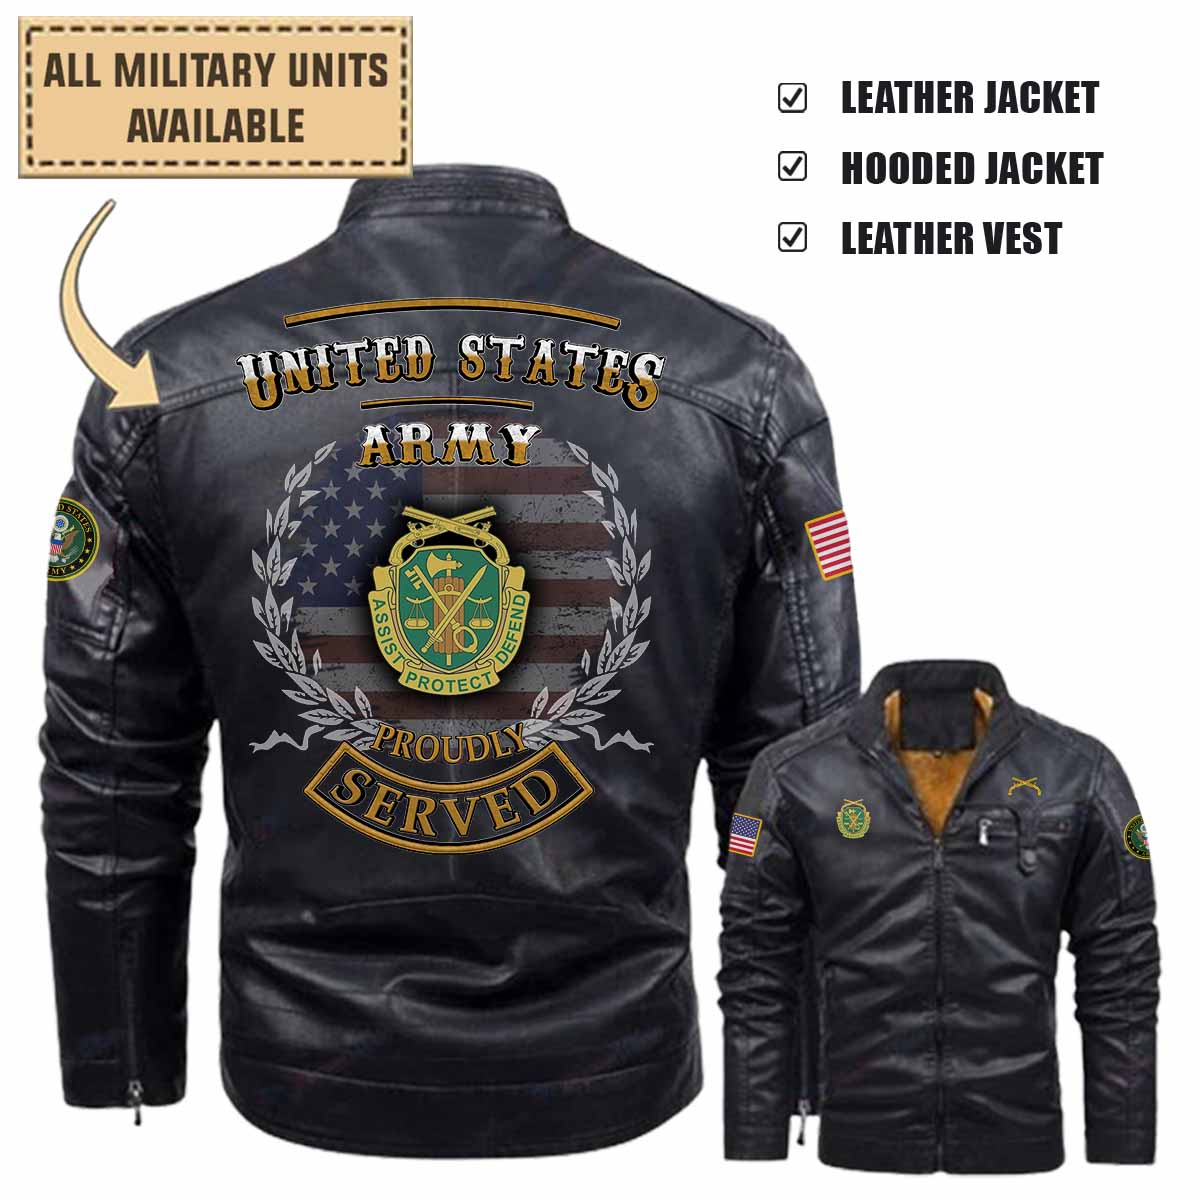 443rd MP CO 443rd Military Police Company_Leather Jacket and Vest